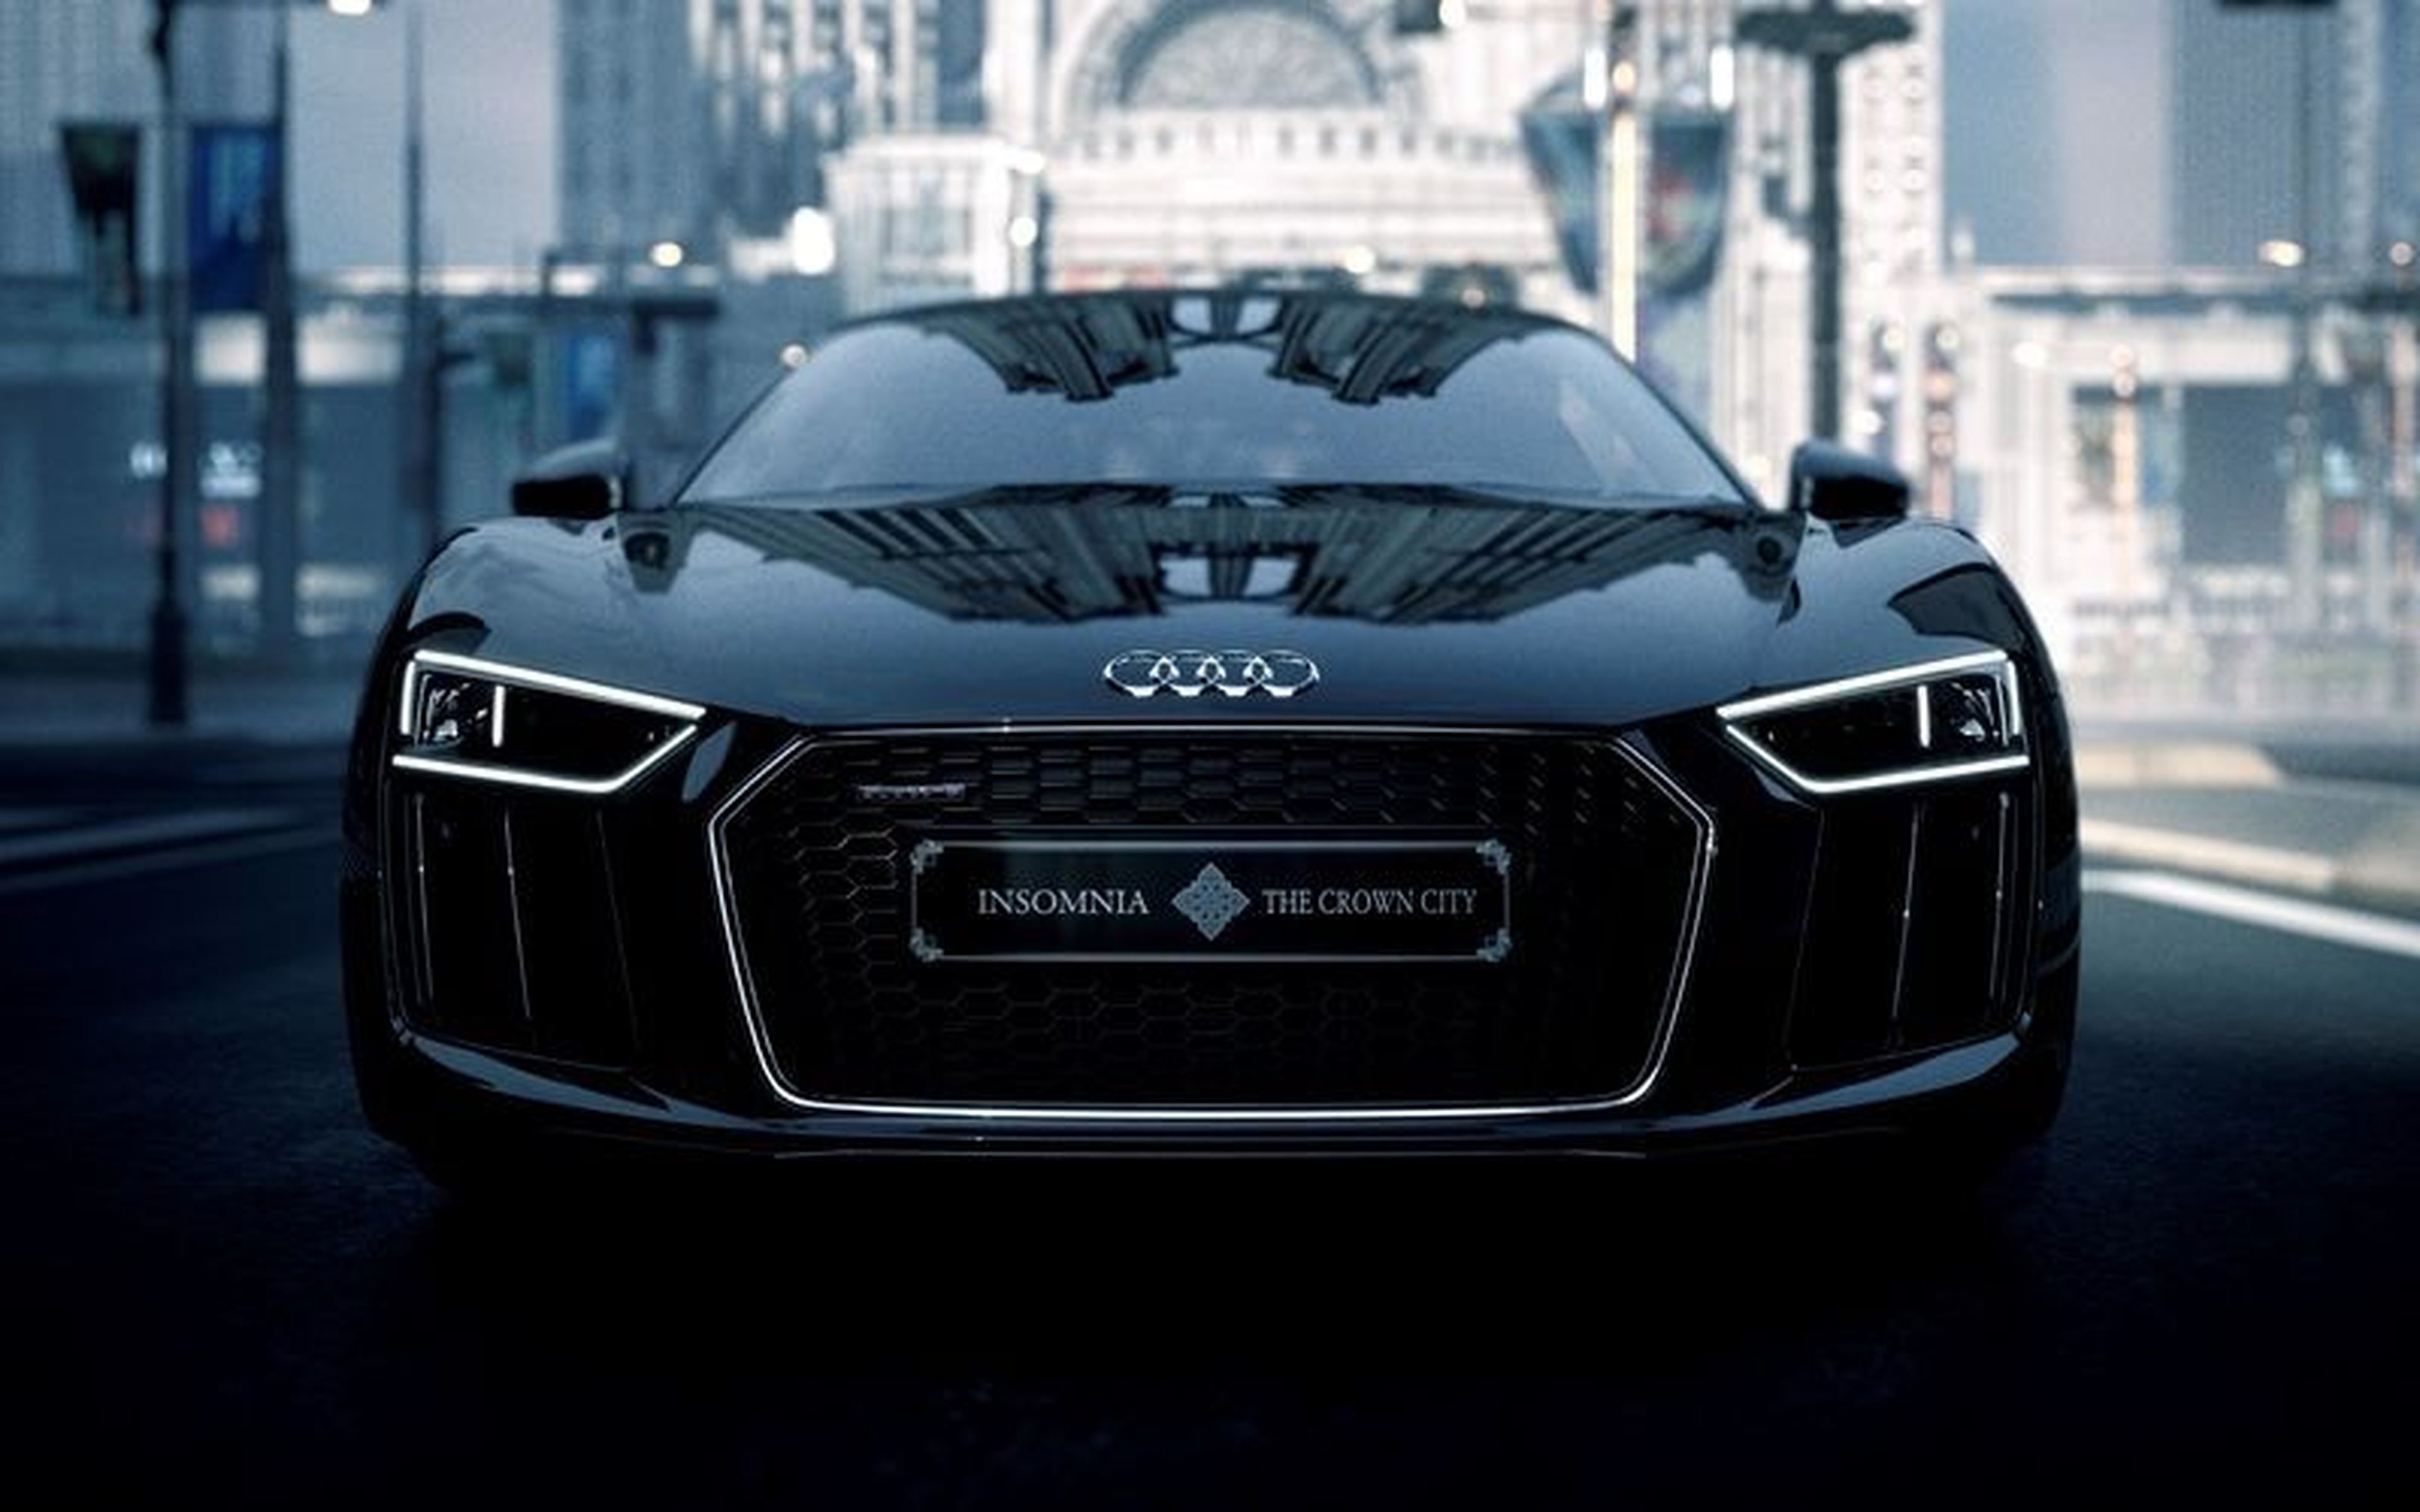 The Audi R8 Star of Lucis has come to the real world from FFXV